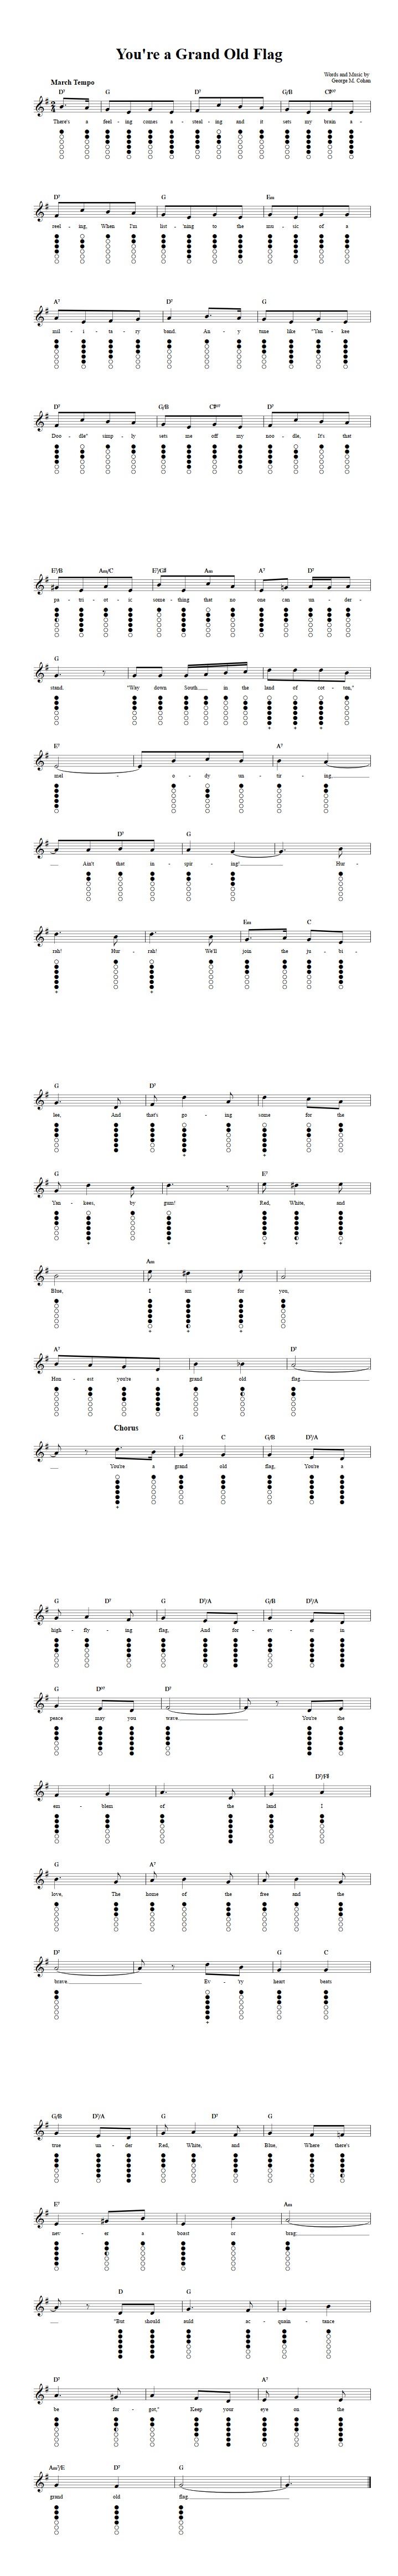 You're a Grand Old Flag Sheet Music and Tab for Tin Whistle with Lyrics